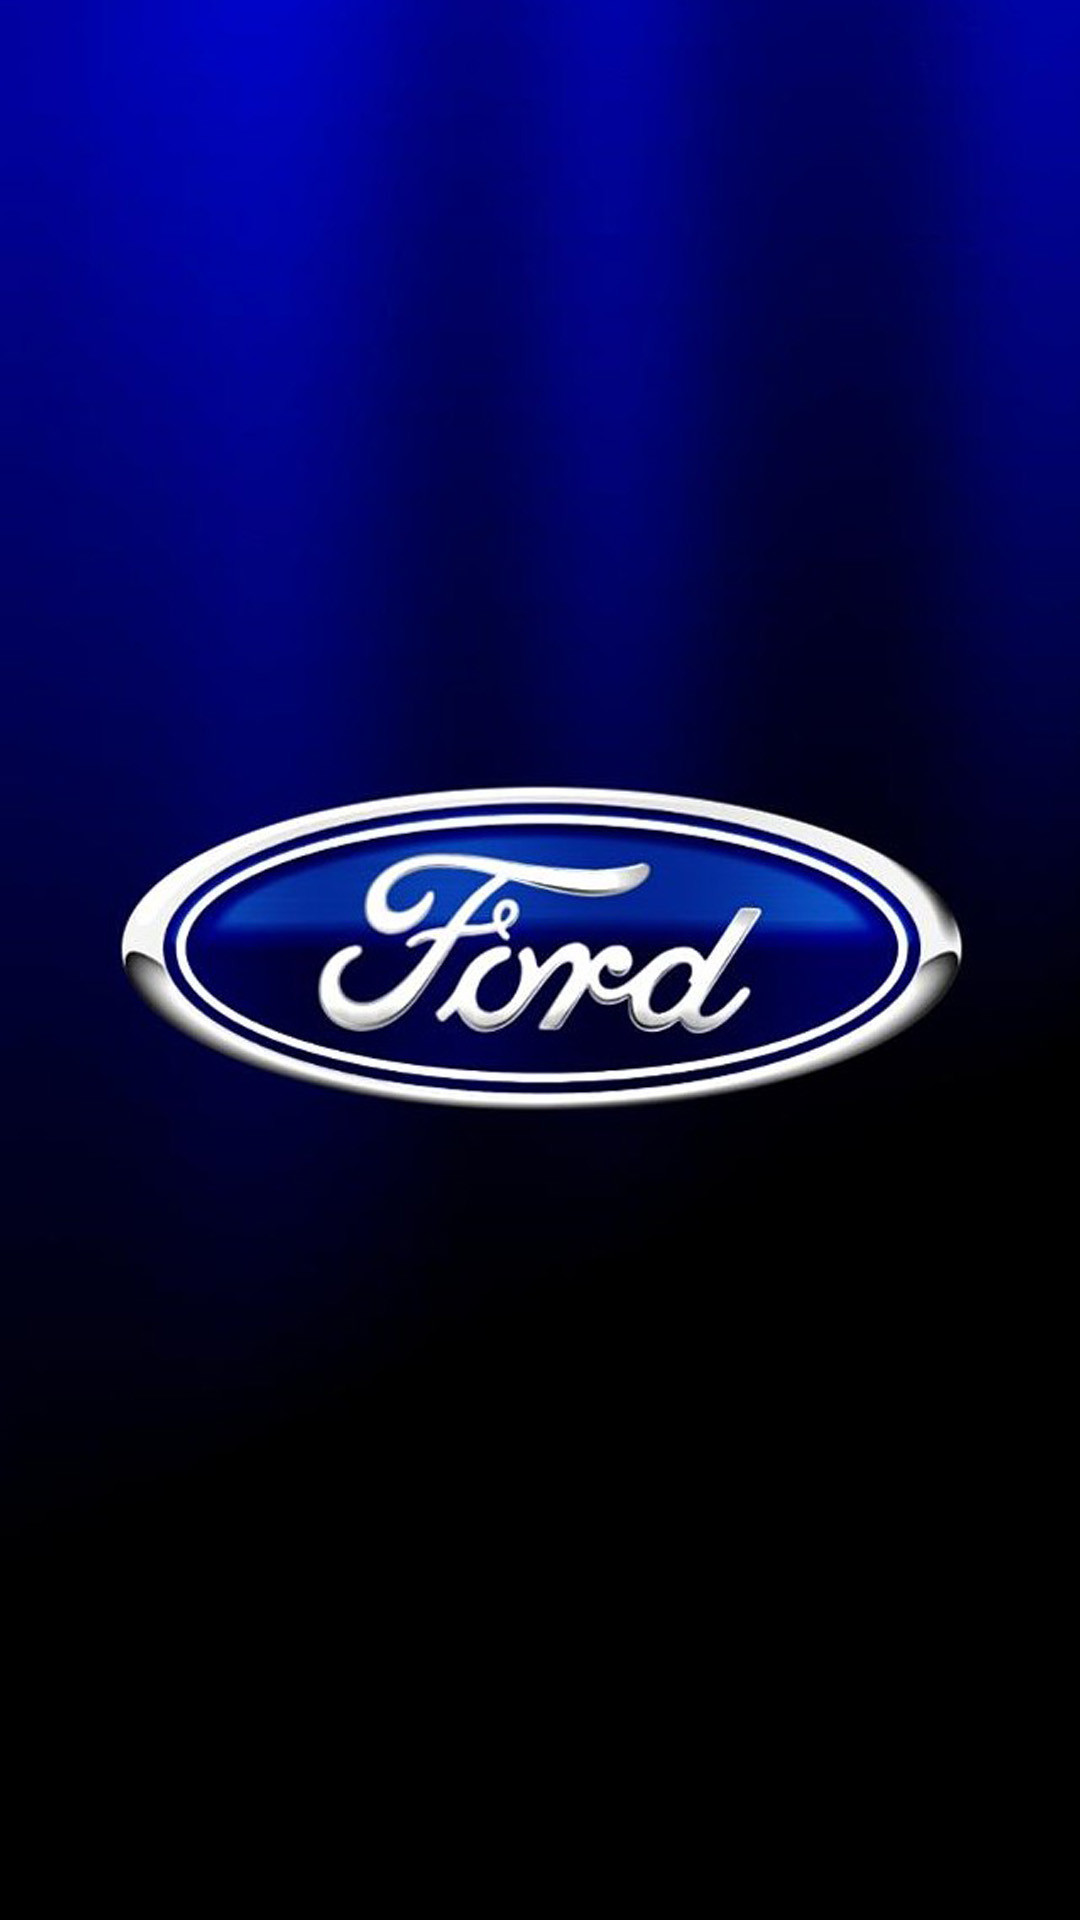 1080x1920 ford mustang logo wallpapers - Quoteko.com